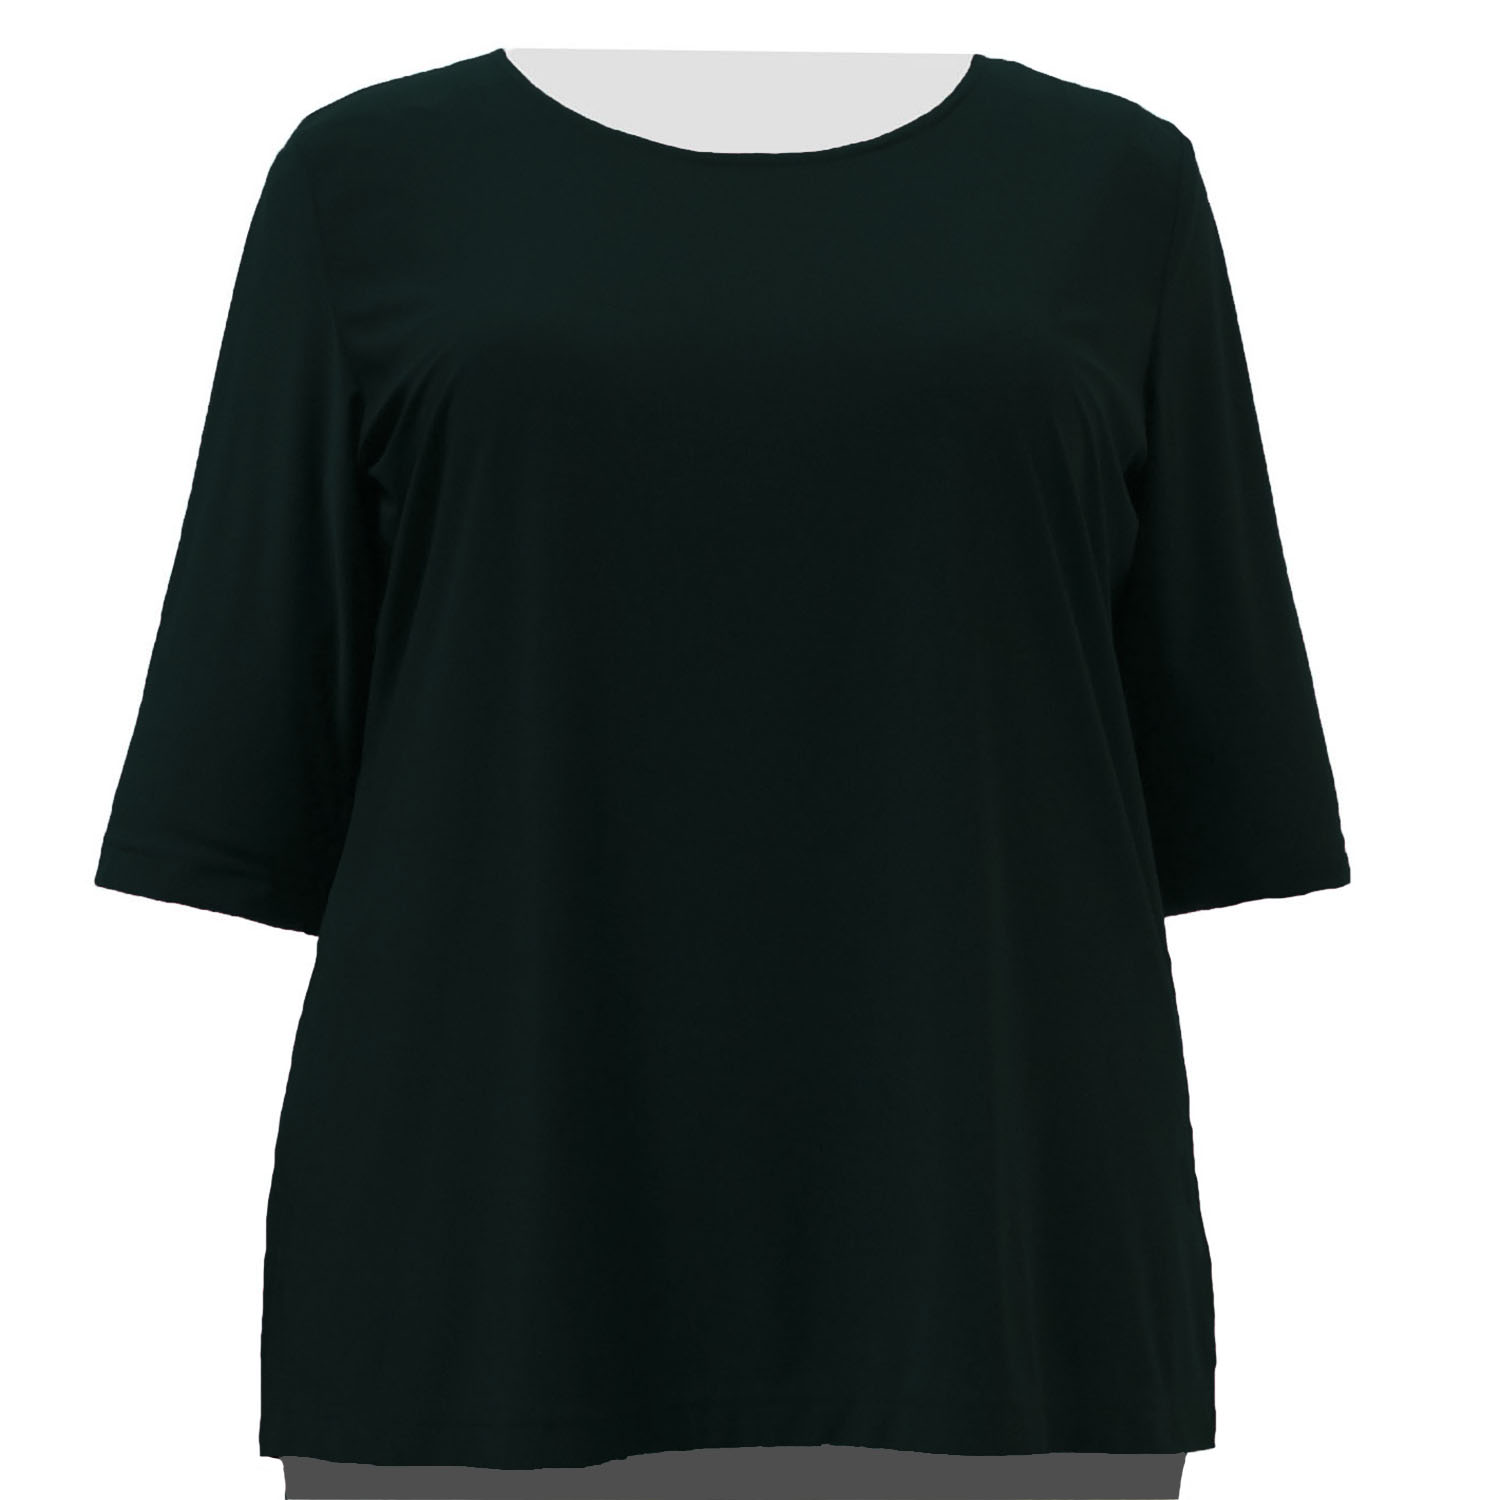 A Personal Touch Black 3/4 Sleeve Round Neck Pullover Top Woman's Plus Size Top